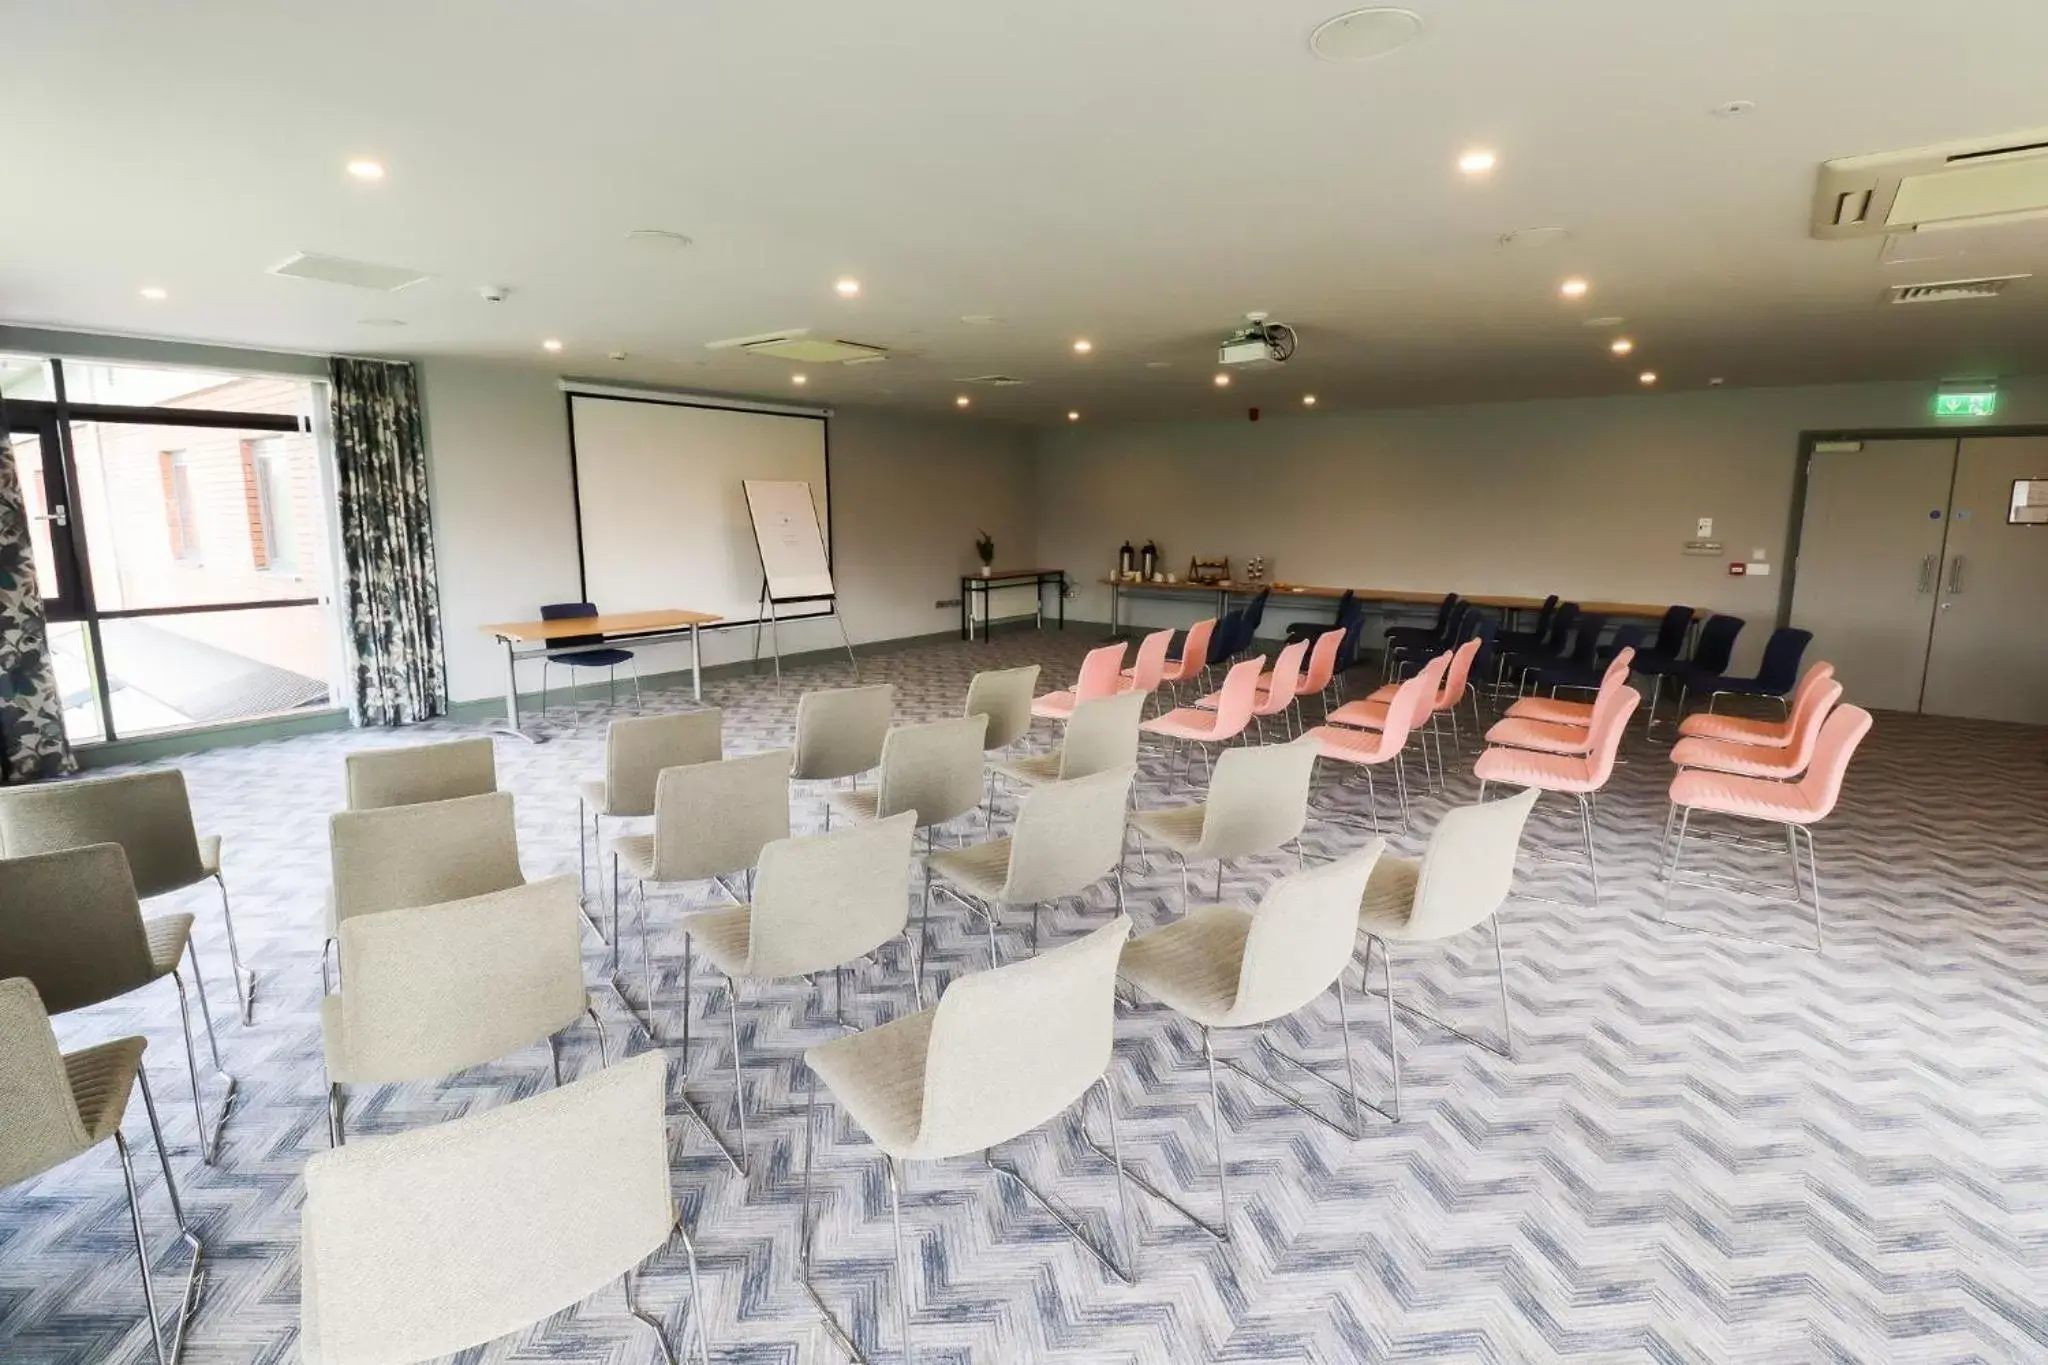 Meeting/conference room, Banquet Facilities in The Hoban Hotel Kilkenny